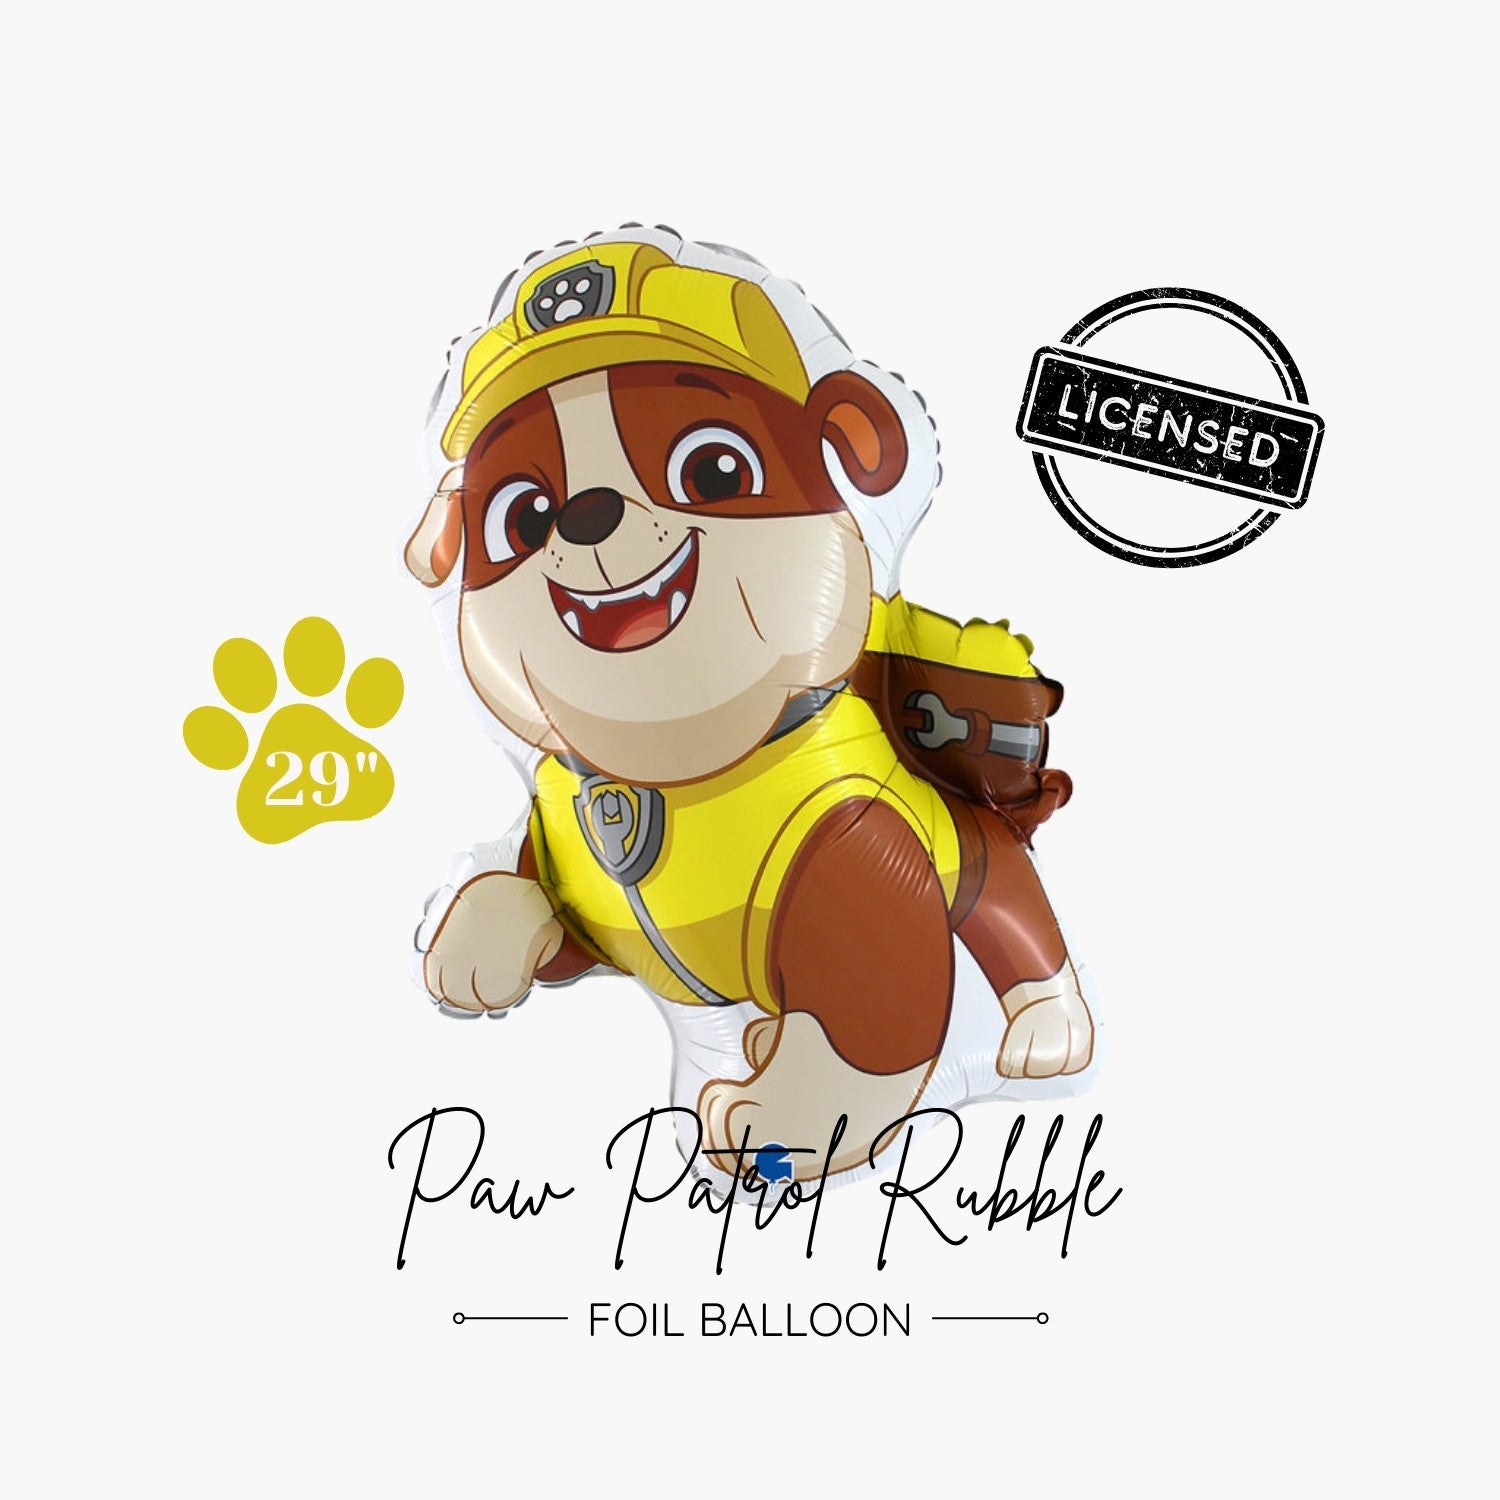 Licensed Paw Patrol Rubble Foil Balloon 29" - Paw Patrol Kids Birthday Party Decorations